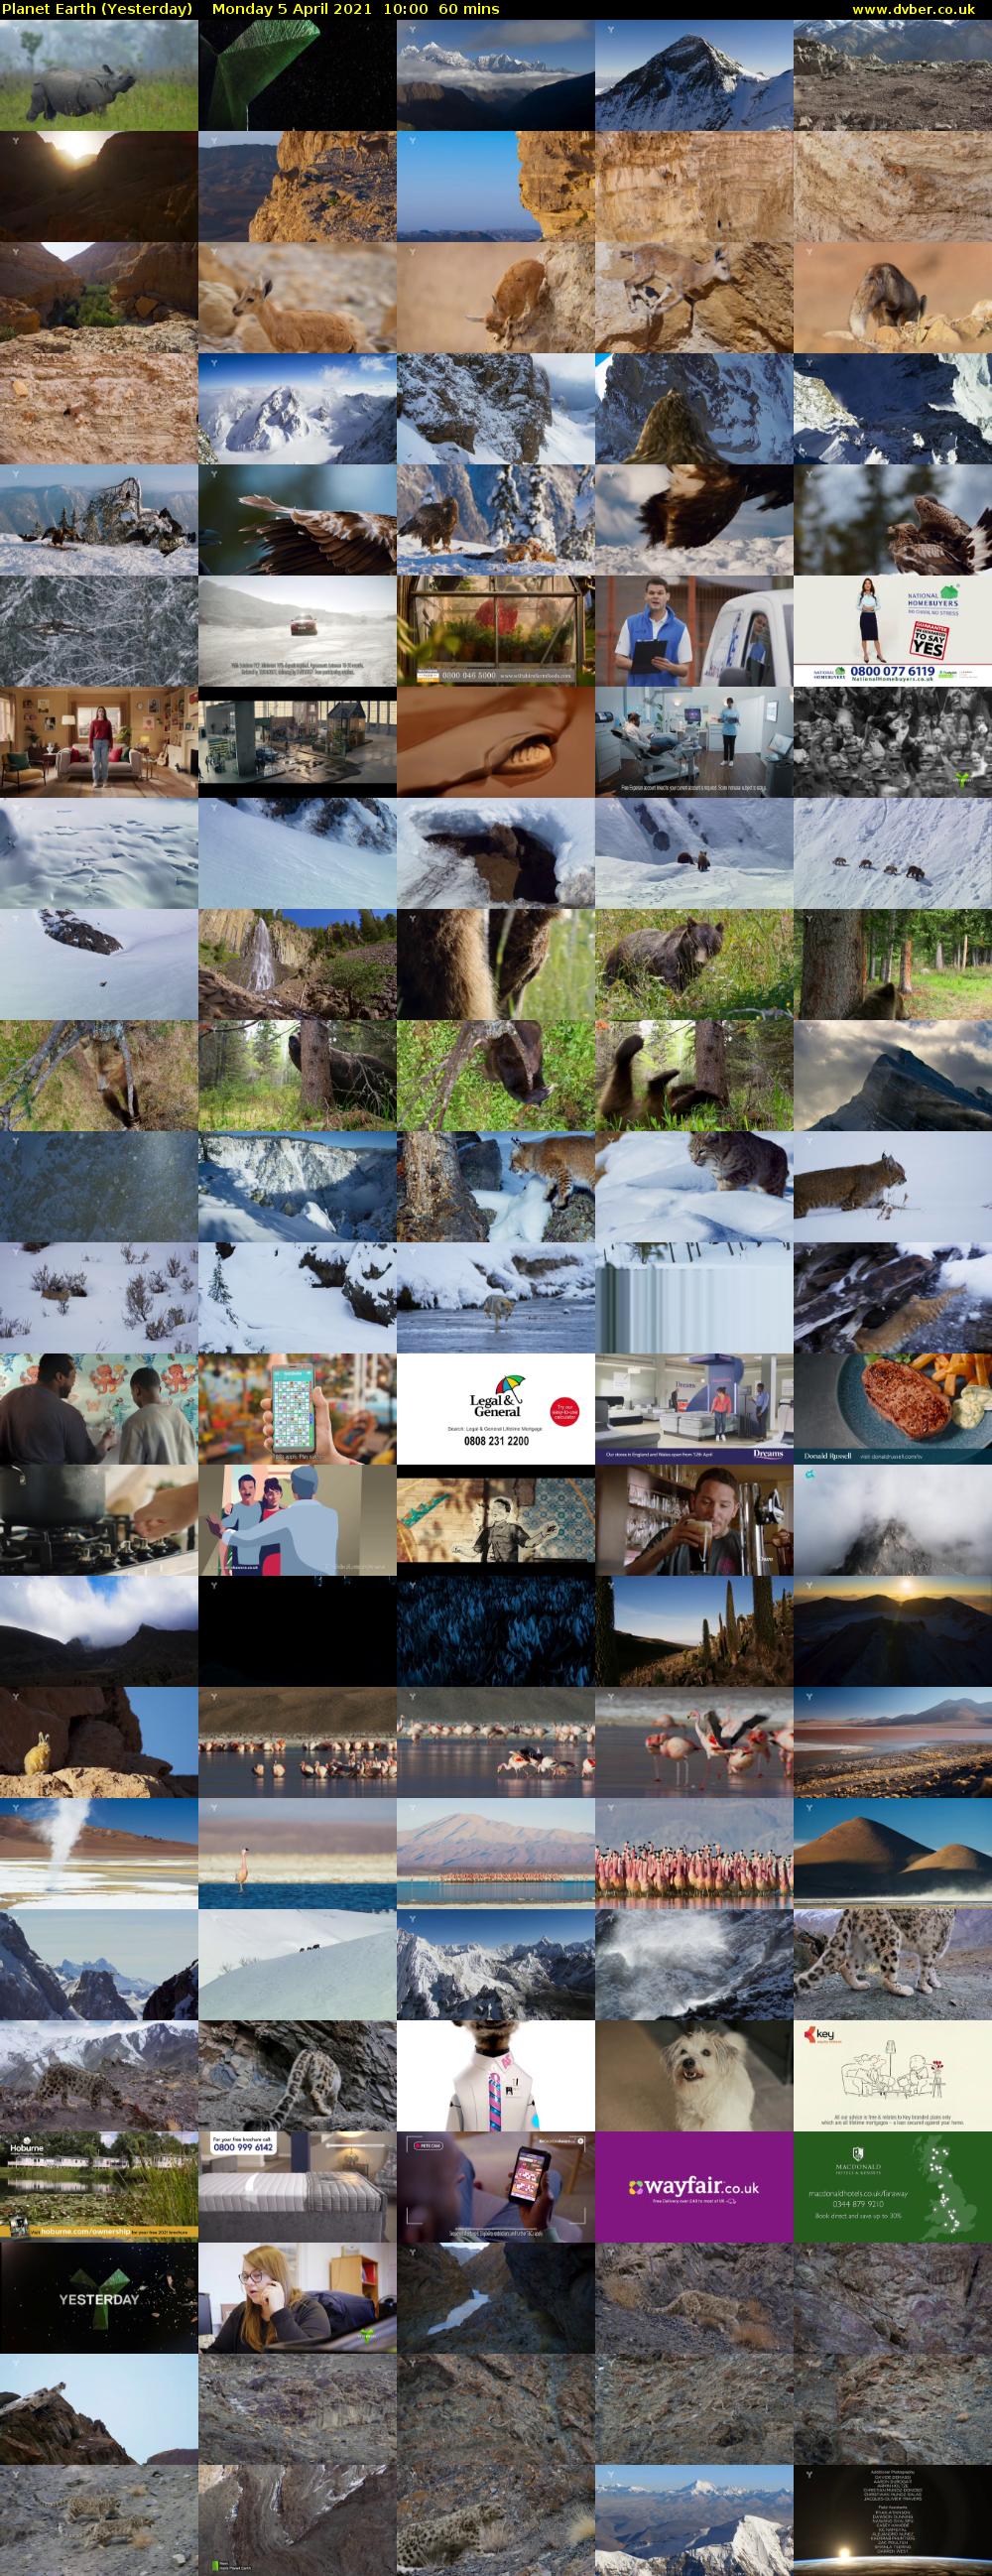 Planet Earth (Yesterday) Monday 5 April 2021 10:00 - 11:00